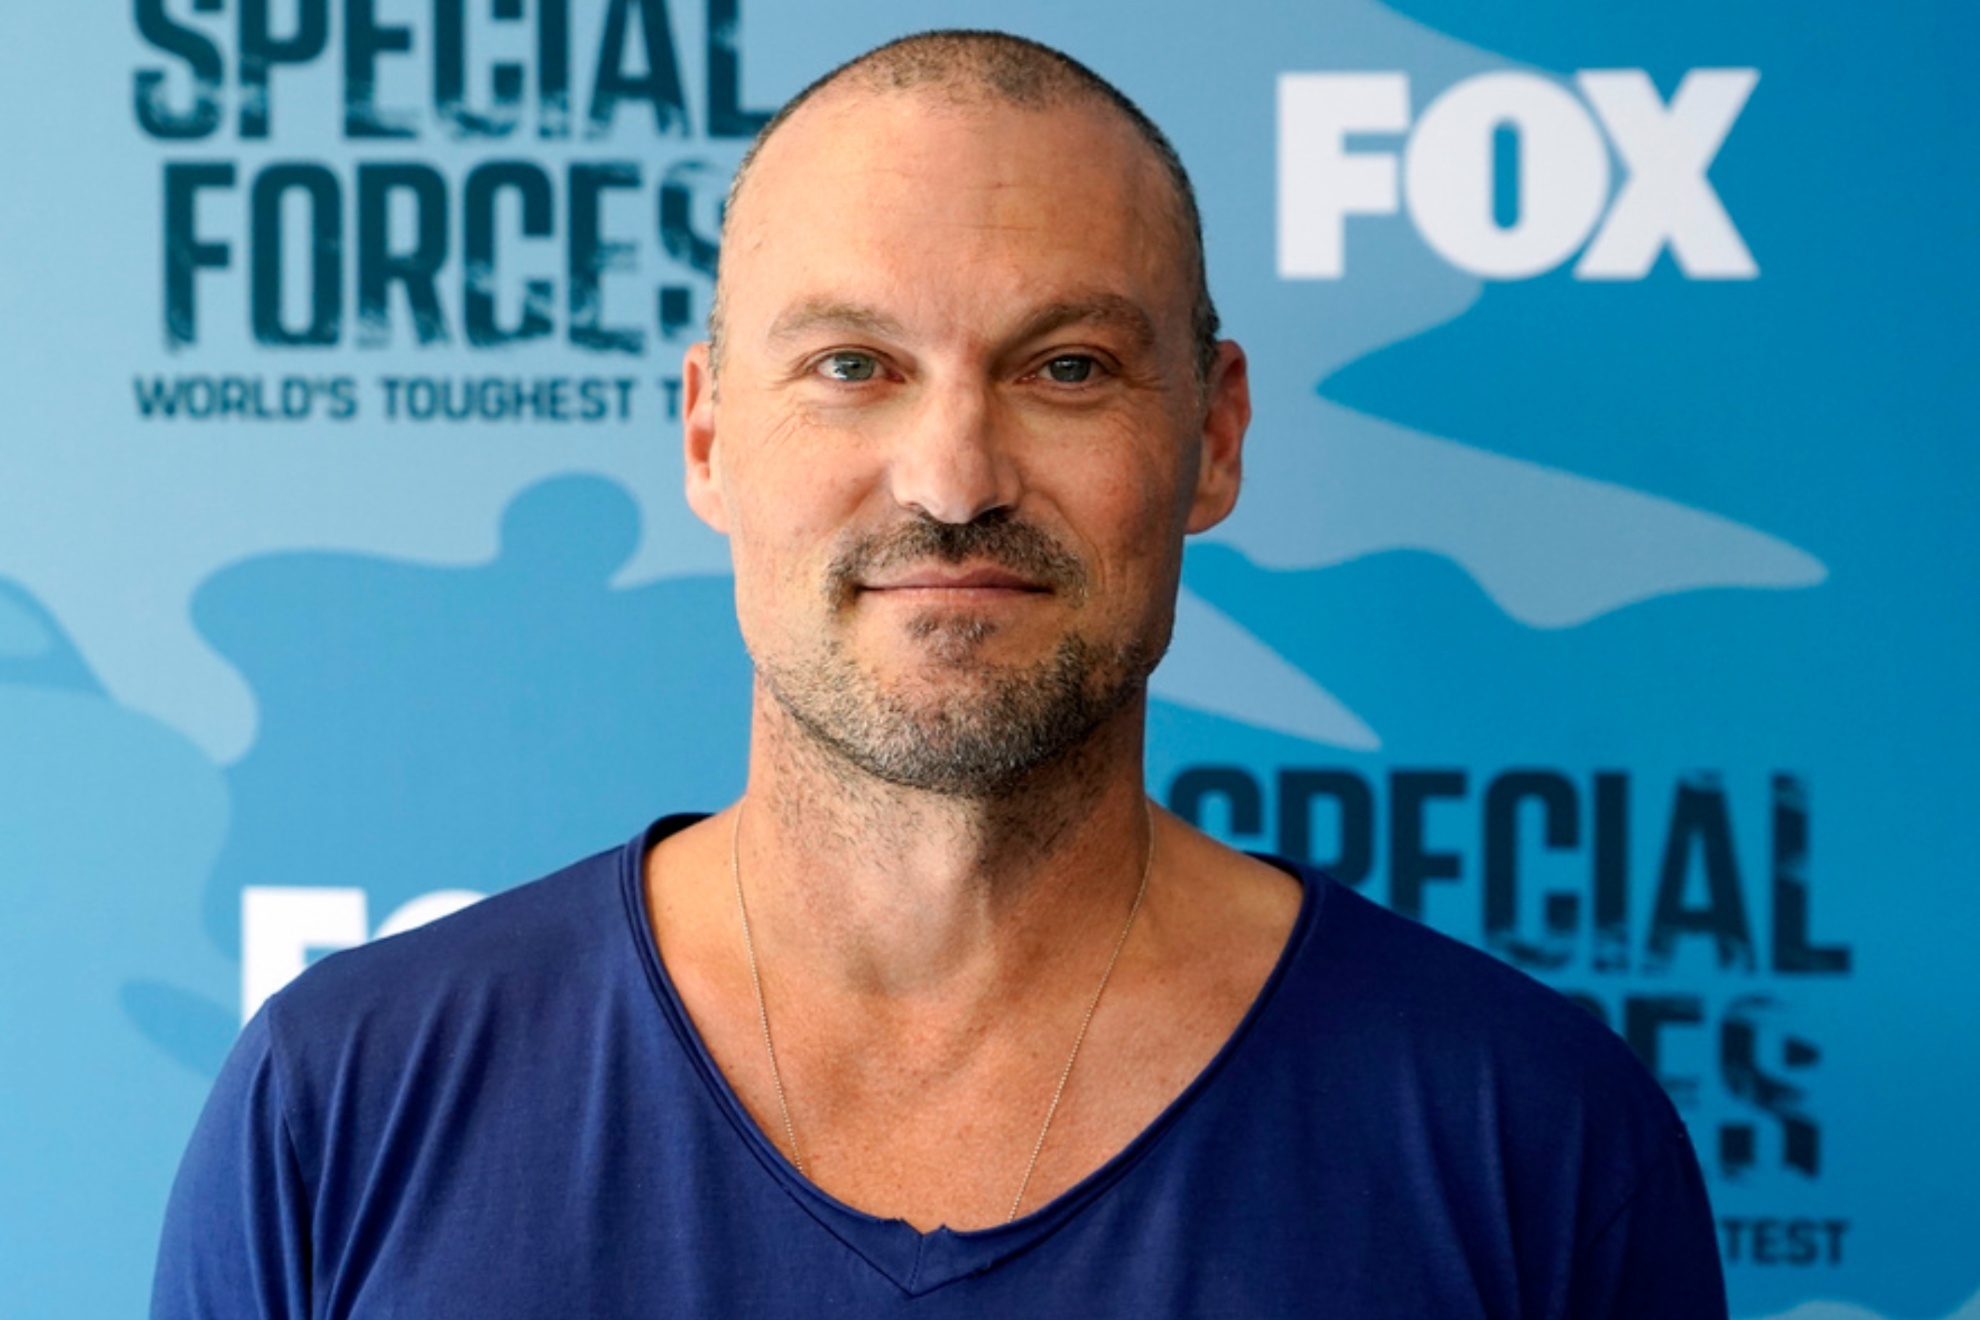 Brian Austin Green recently announced her engagement with Sharna Burgess